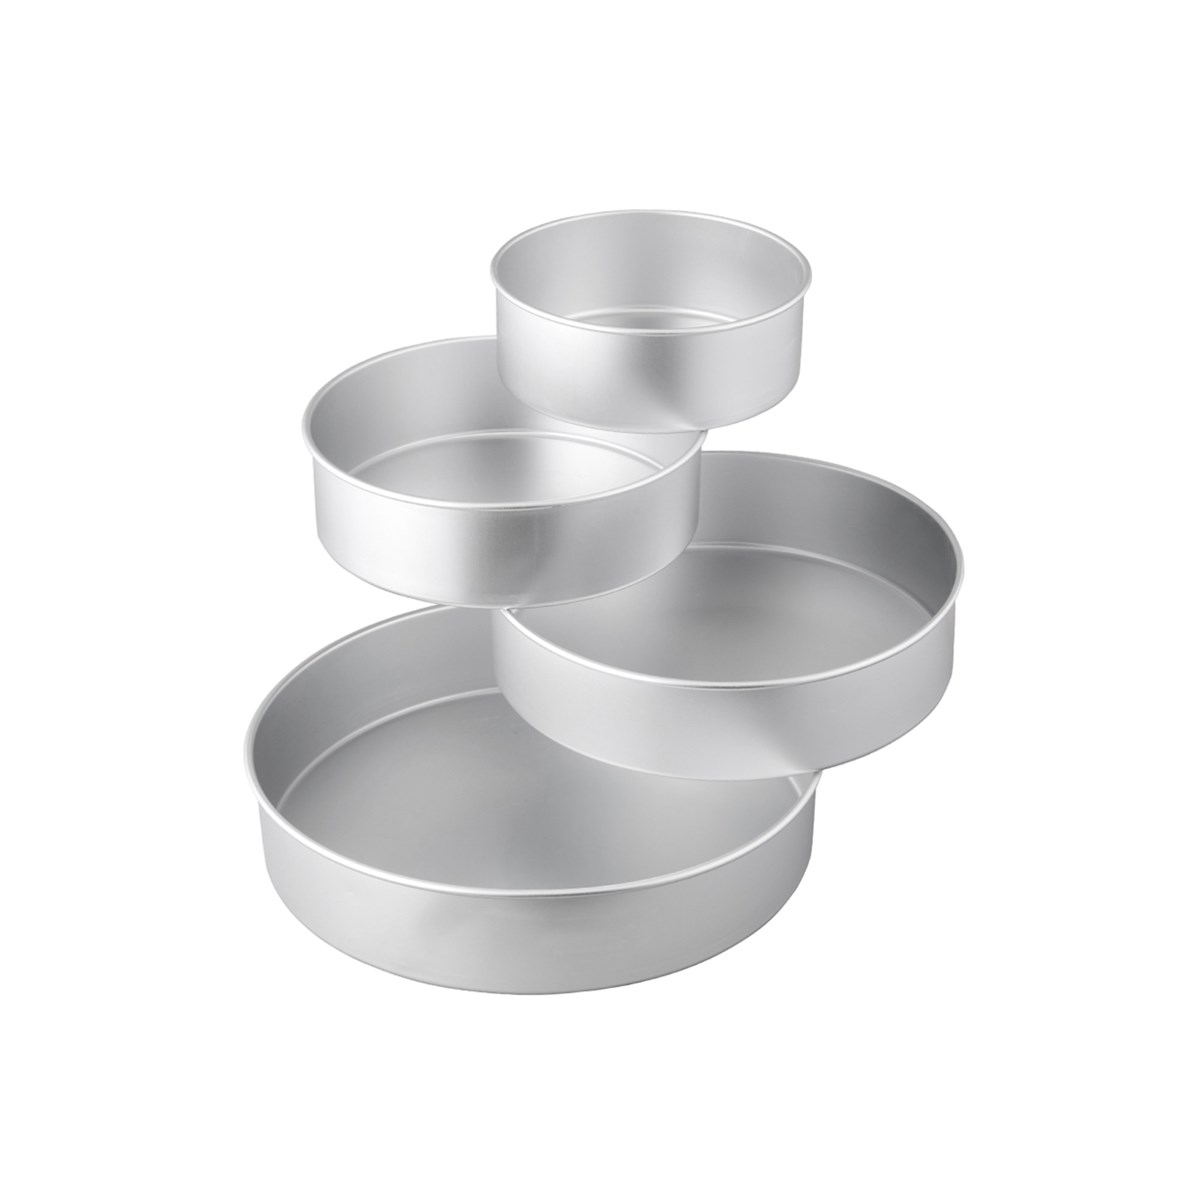 Wilton Performance Pans Aluminum 4-Piece Large Round Cake Pan Set with  14-Inch, 12-Inch, 10-Inch and 8-Inch Cake Pans